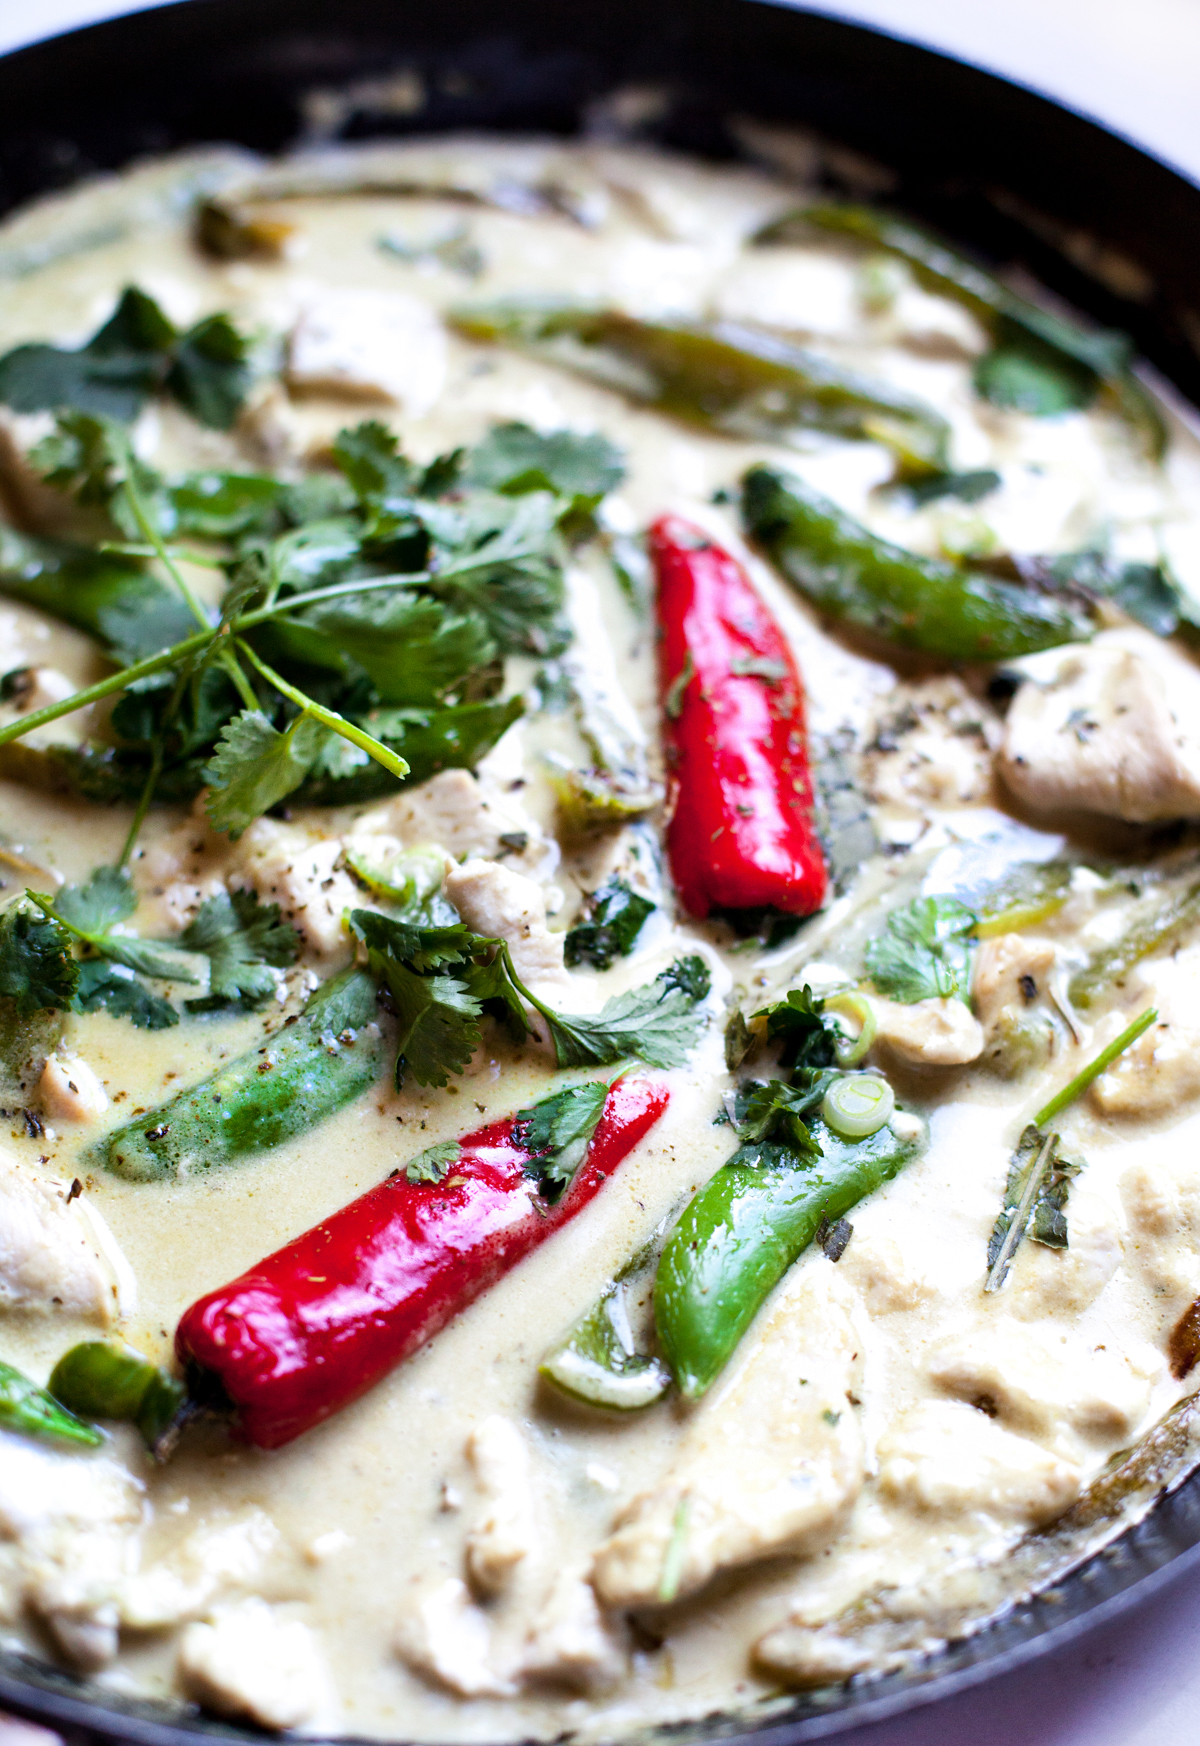 Easy Thai Green Curry Recipe - Only takes 15 minutes to make